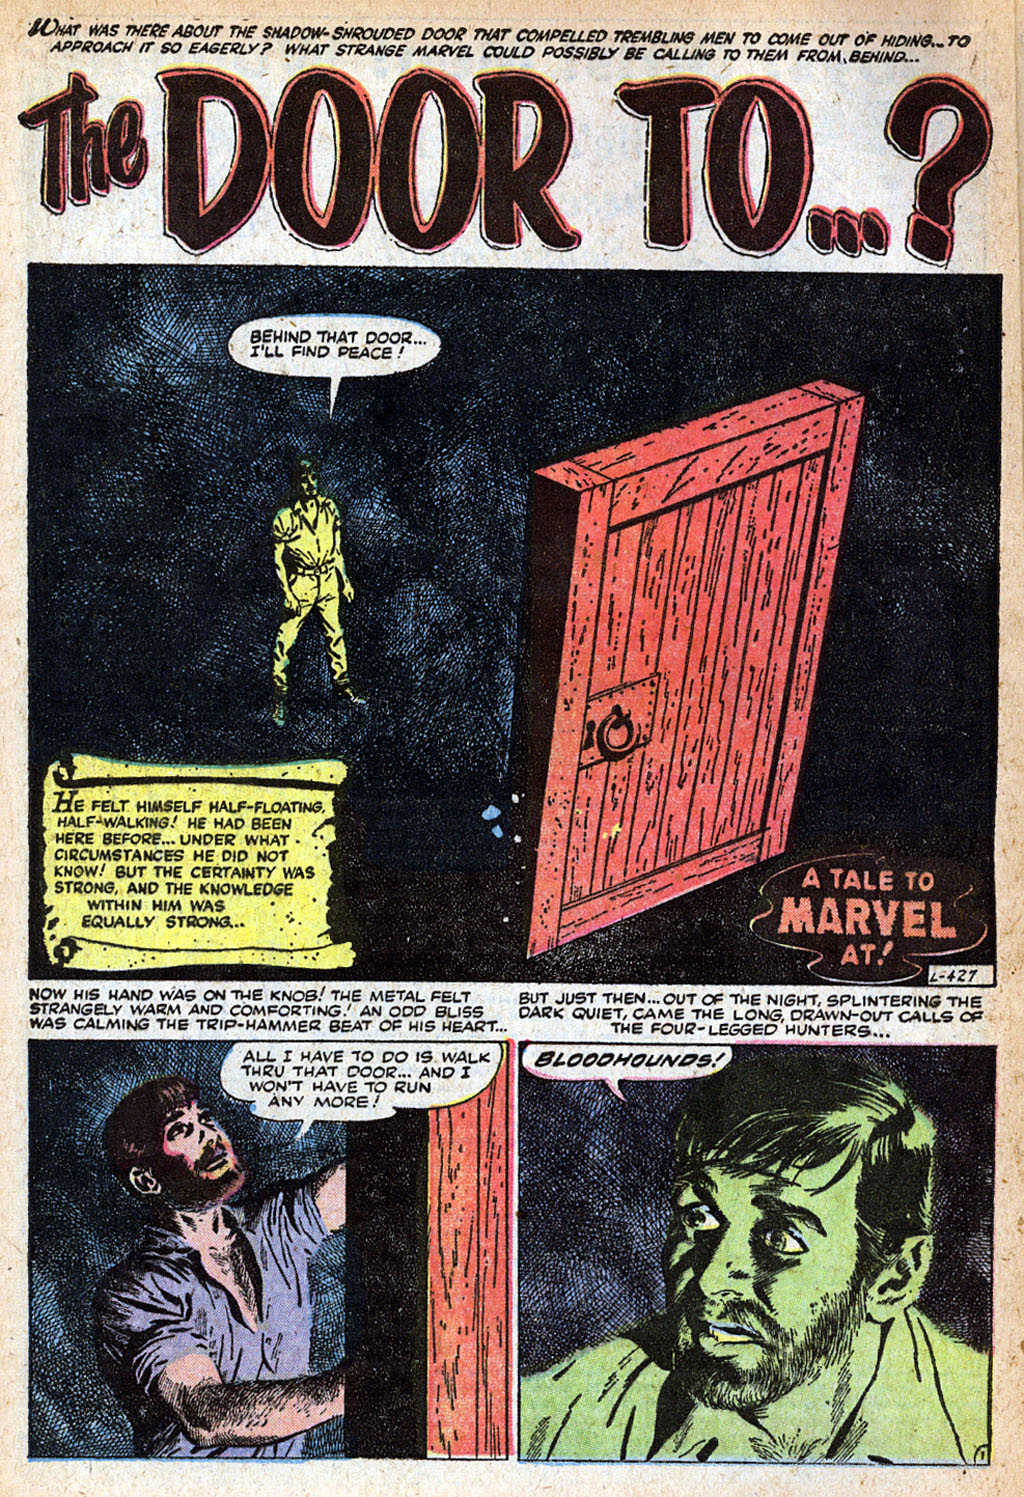 Marvel Tales (1949) 156 Page 7